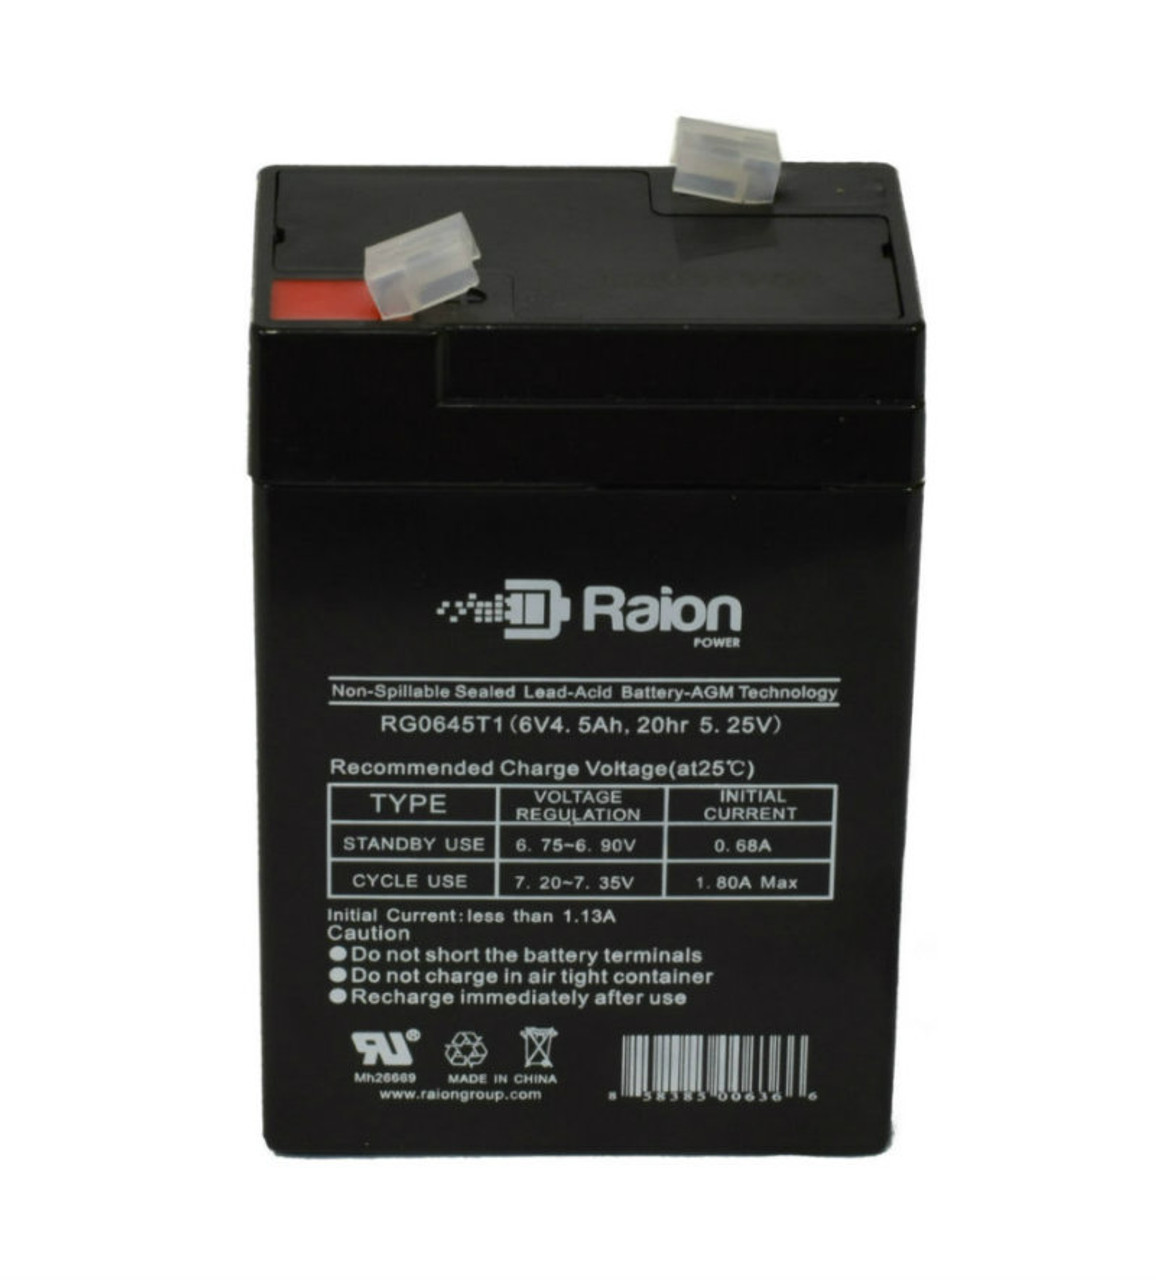 Raion Power RG0645T1 Replacement Battery Cartridge for Silent Knight 5207